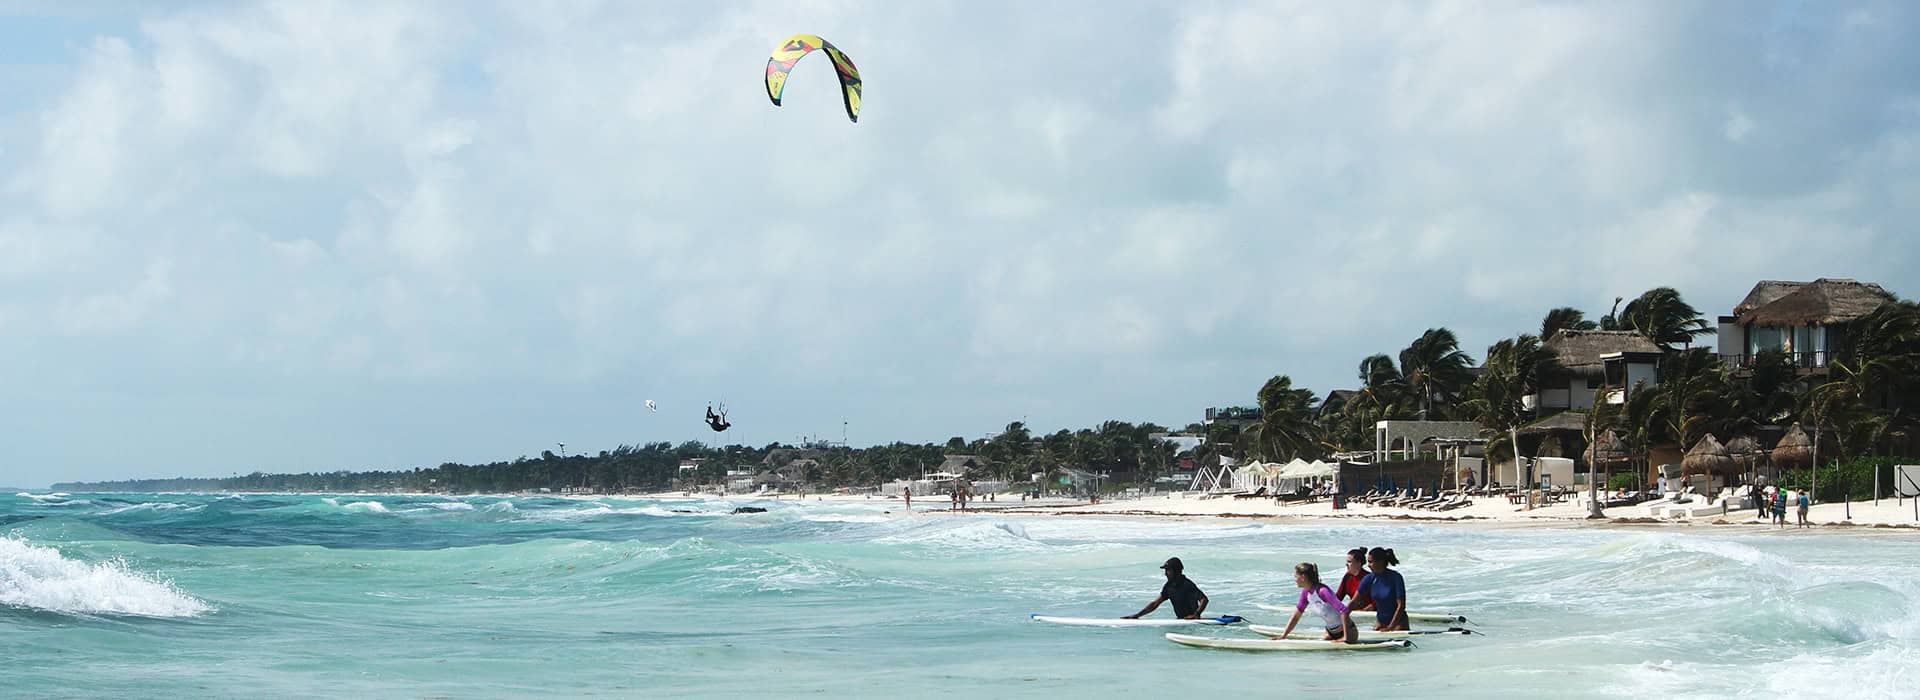 Group of beginners enters the ocean at our bay in Tulum for first surf lesson.